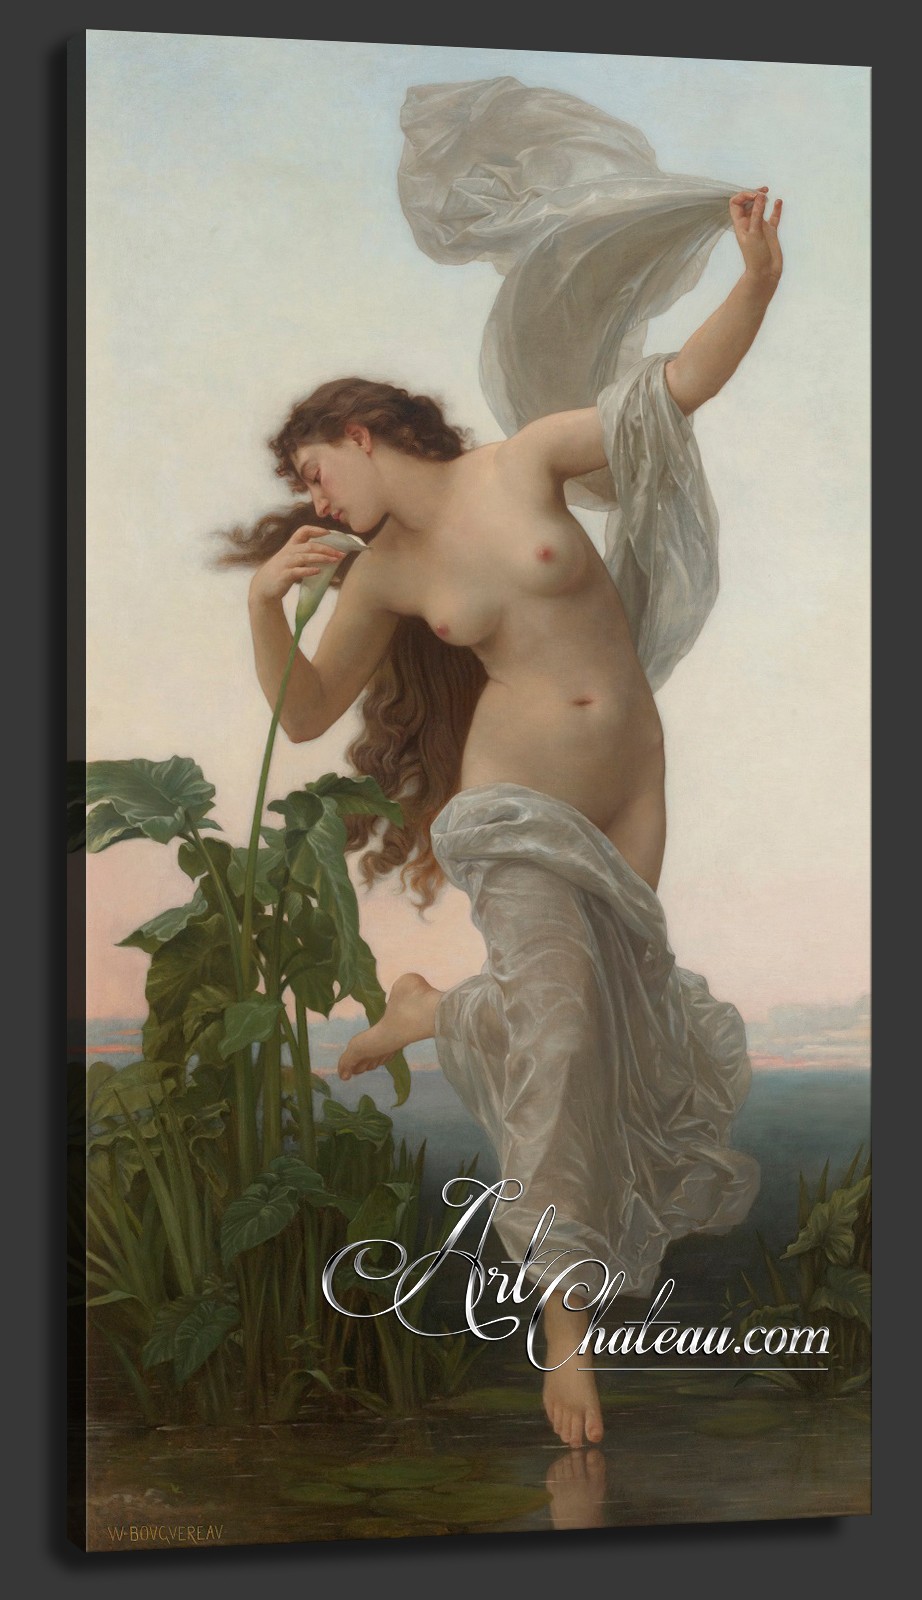 Le Jour, a Mixed Media Painting after William Bouguereau